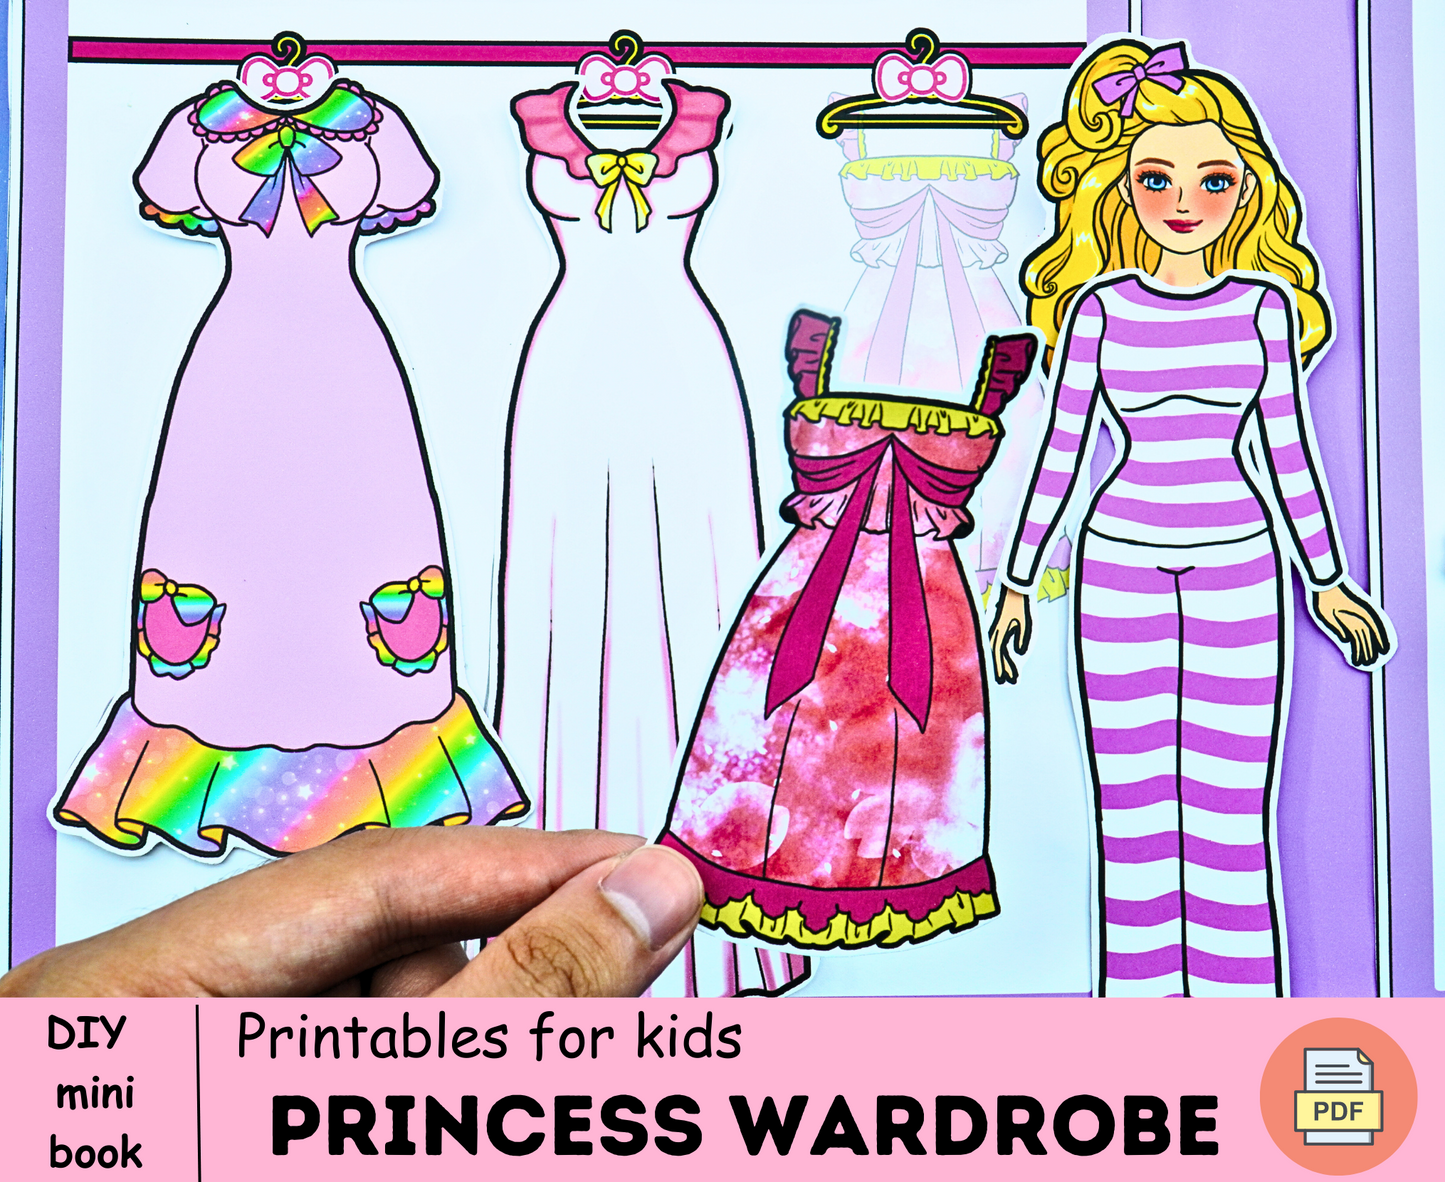 Pijama wardrobe for Printable Paper Doll Dress Up Kit 🌈DIY Busy Book | Easy Paper Craft | Girls Crafts | Holiday Home Activity for Kids 🌈 Woa Doll Crafts